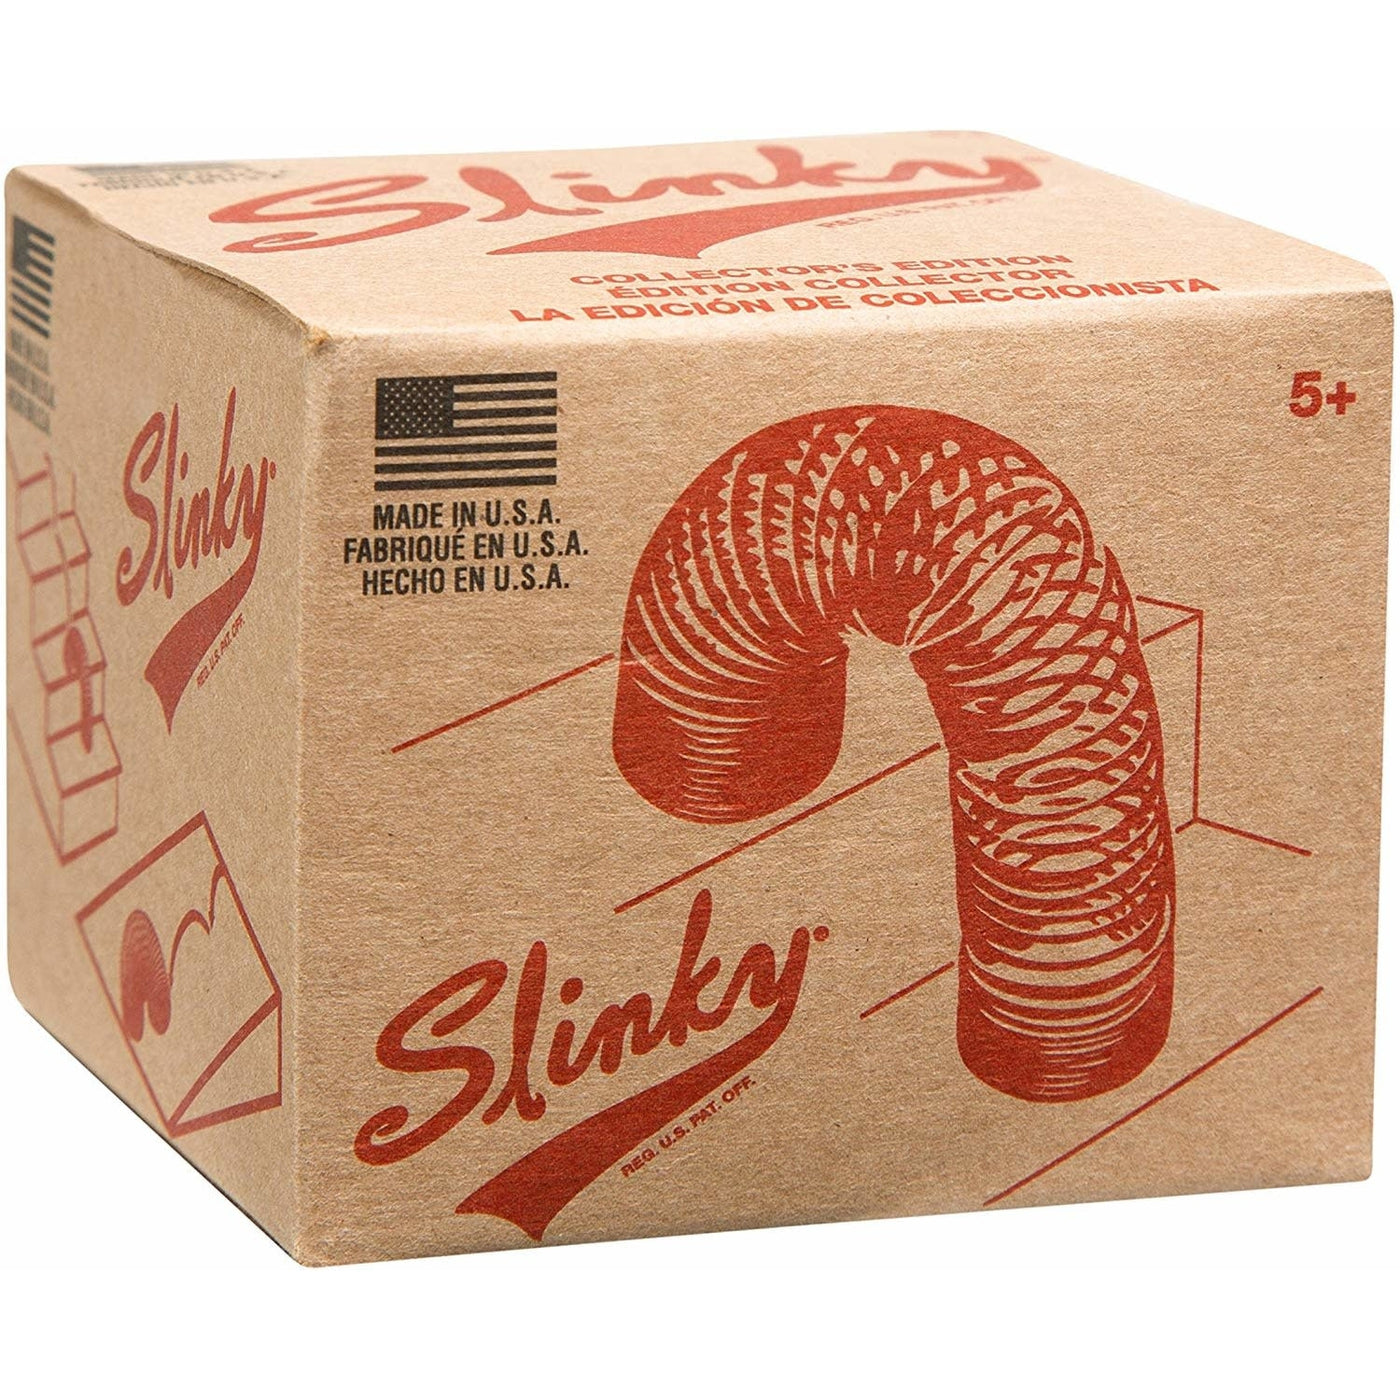 Slinky - Collector's Edition toy